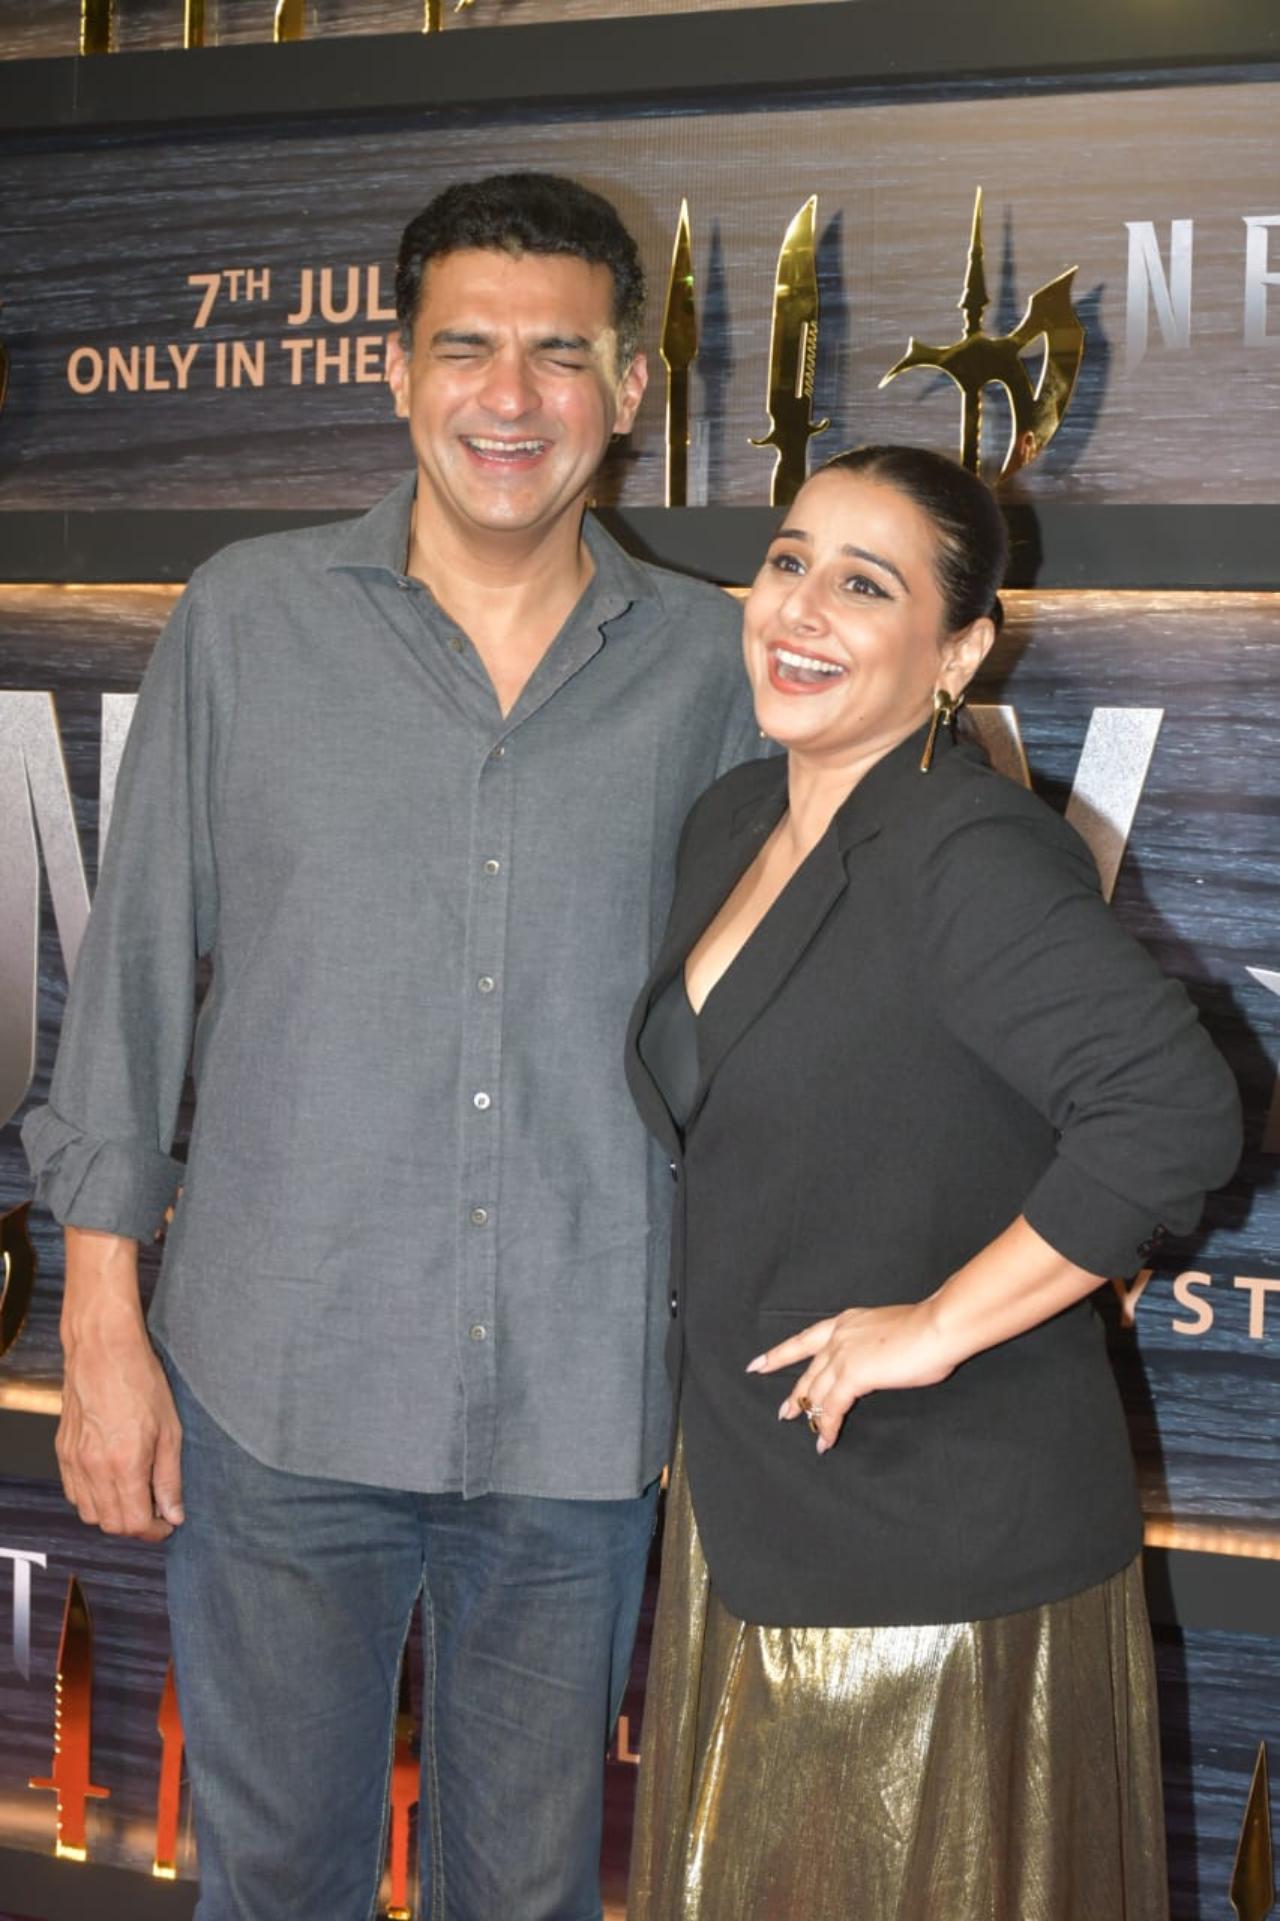 Siddharth Roy Kapur was all cheers for his wife Vidya Balan who is leading the investigation in Anu Menon's film 'Neeyat'